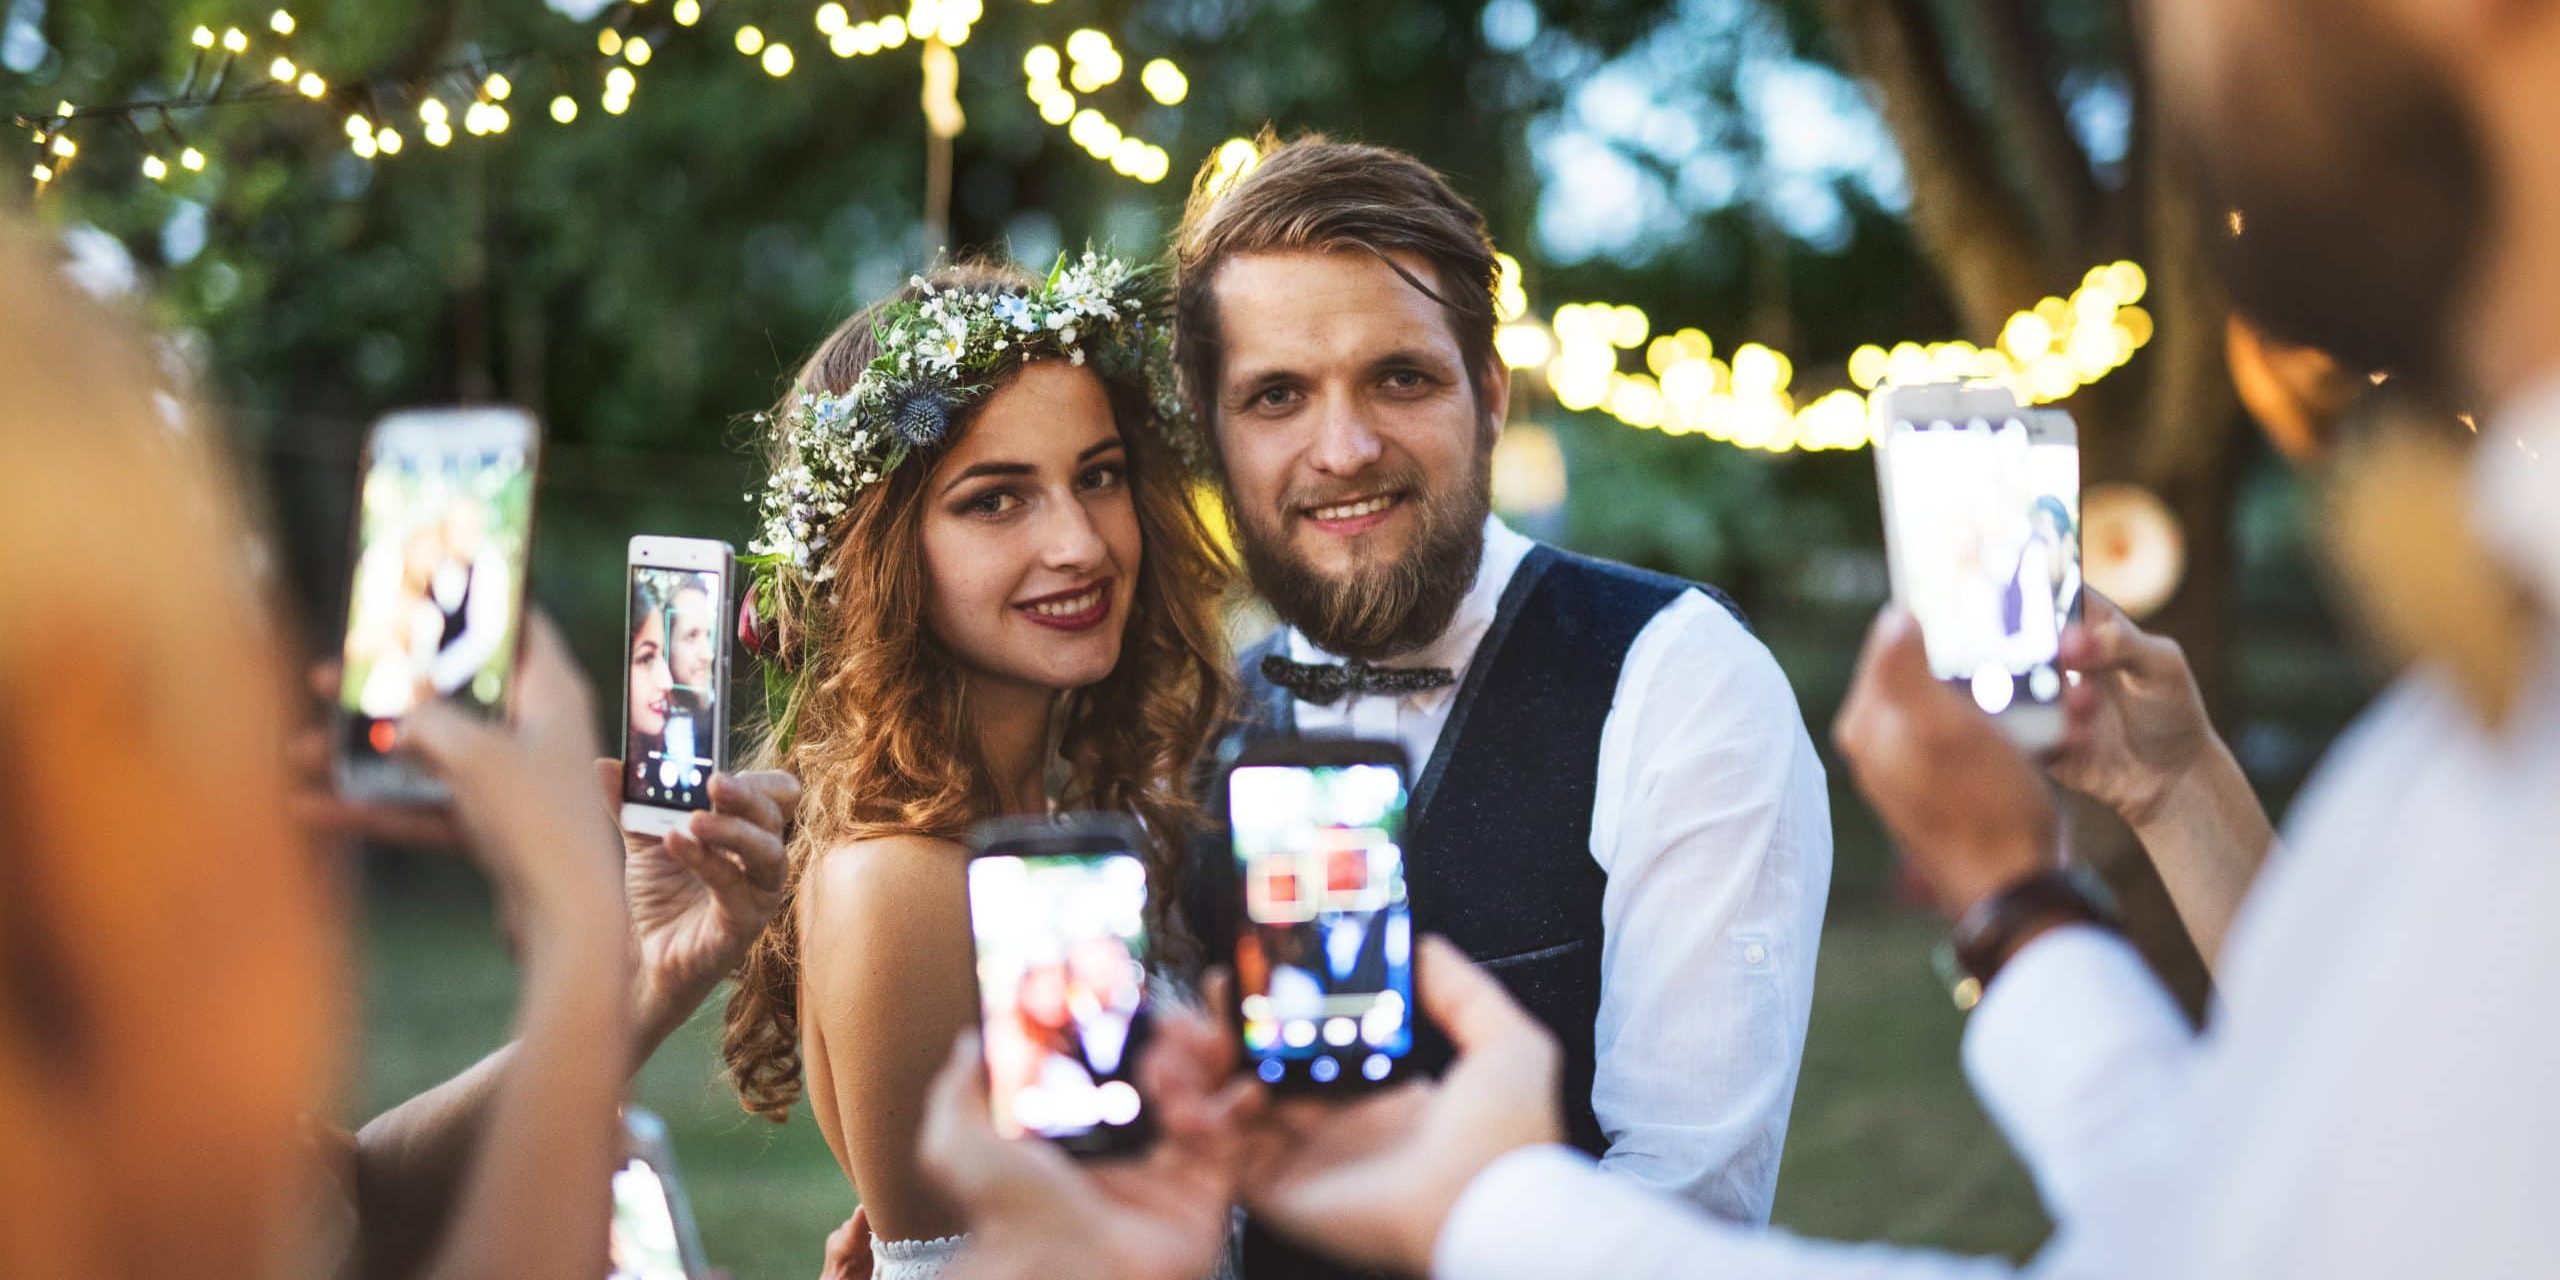 Guests with smartphones taking photo of bride and groom at wedding reception outside in the backyard.